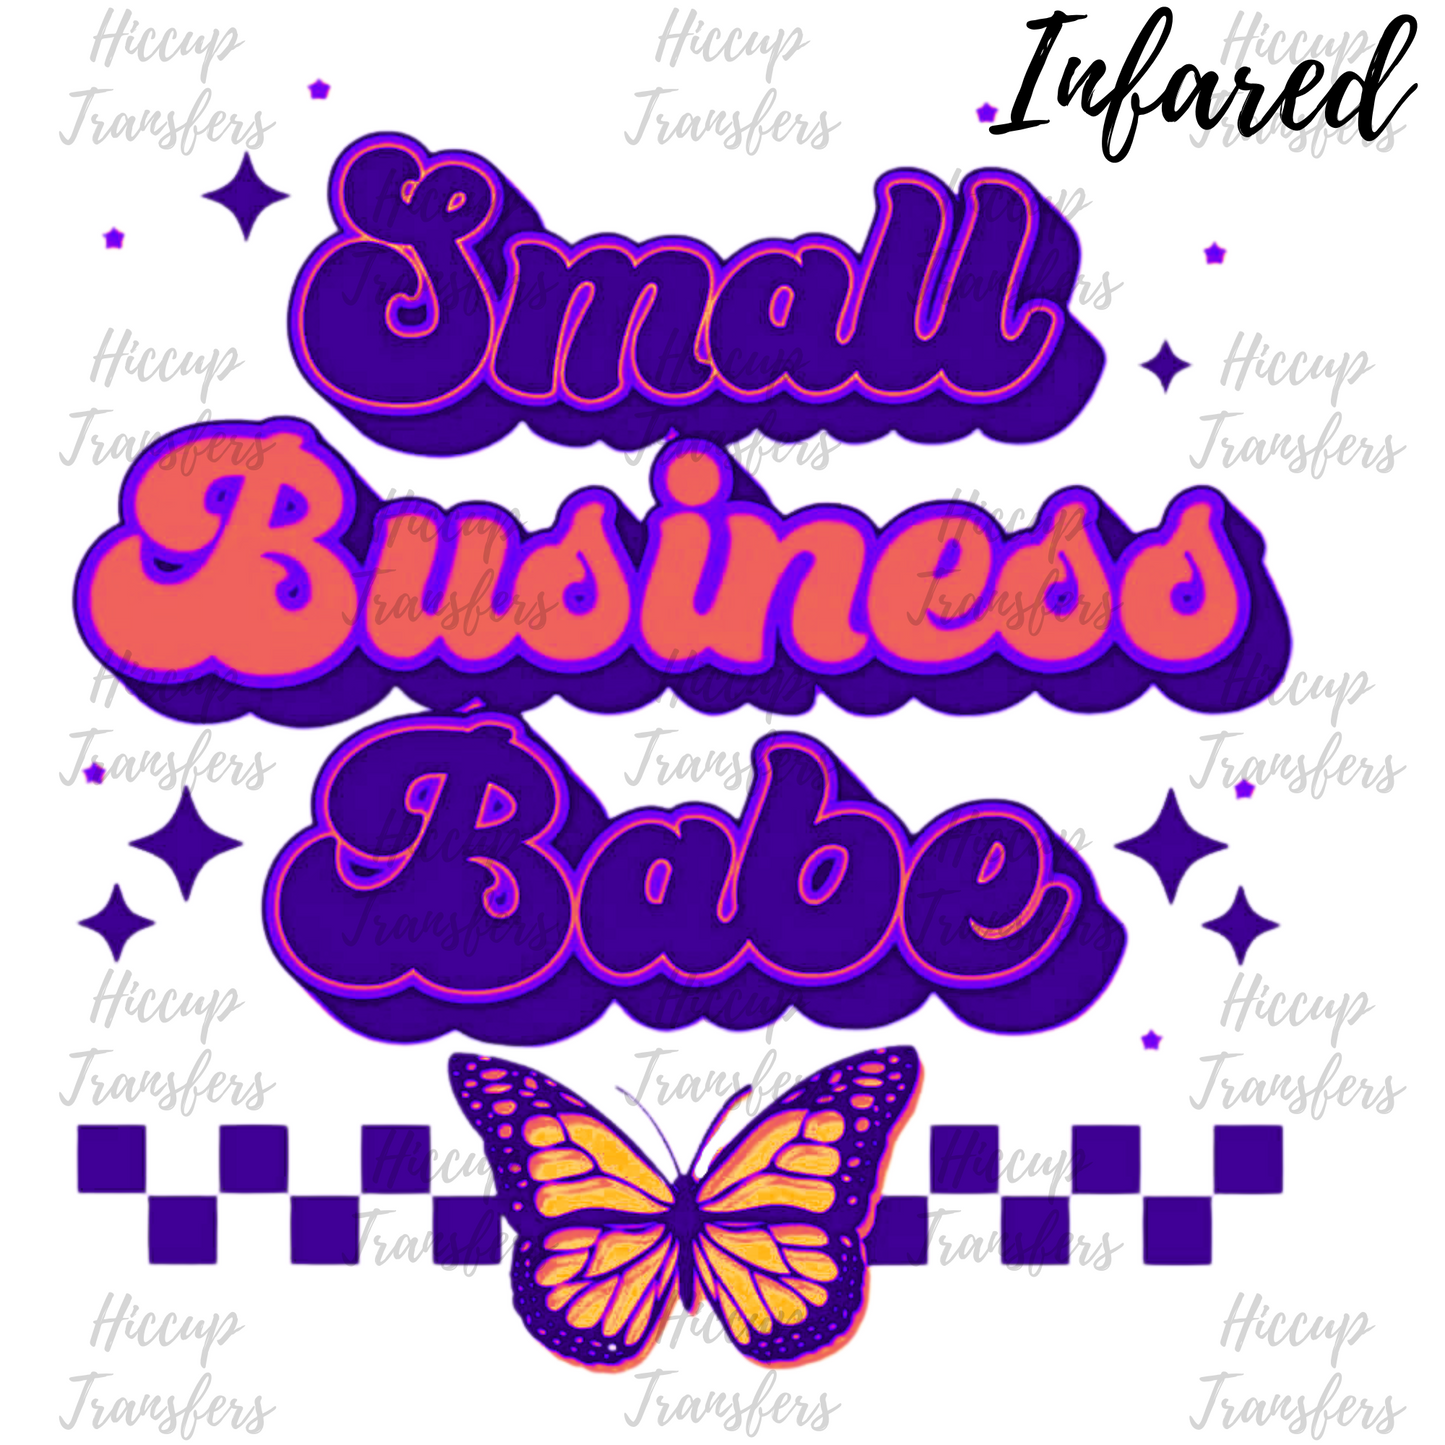 Small business babe DTF transfer